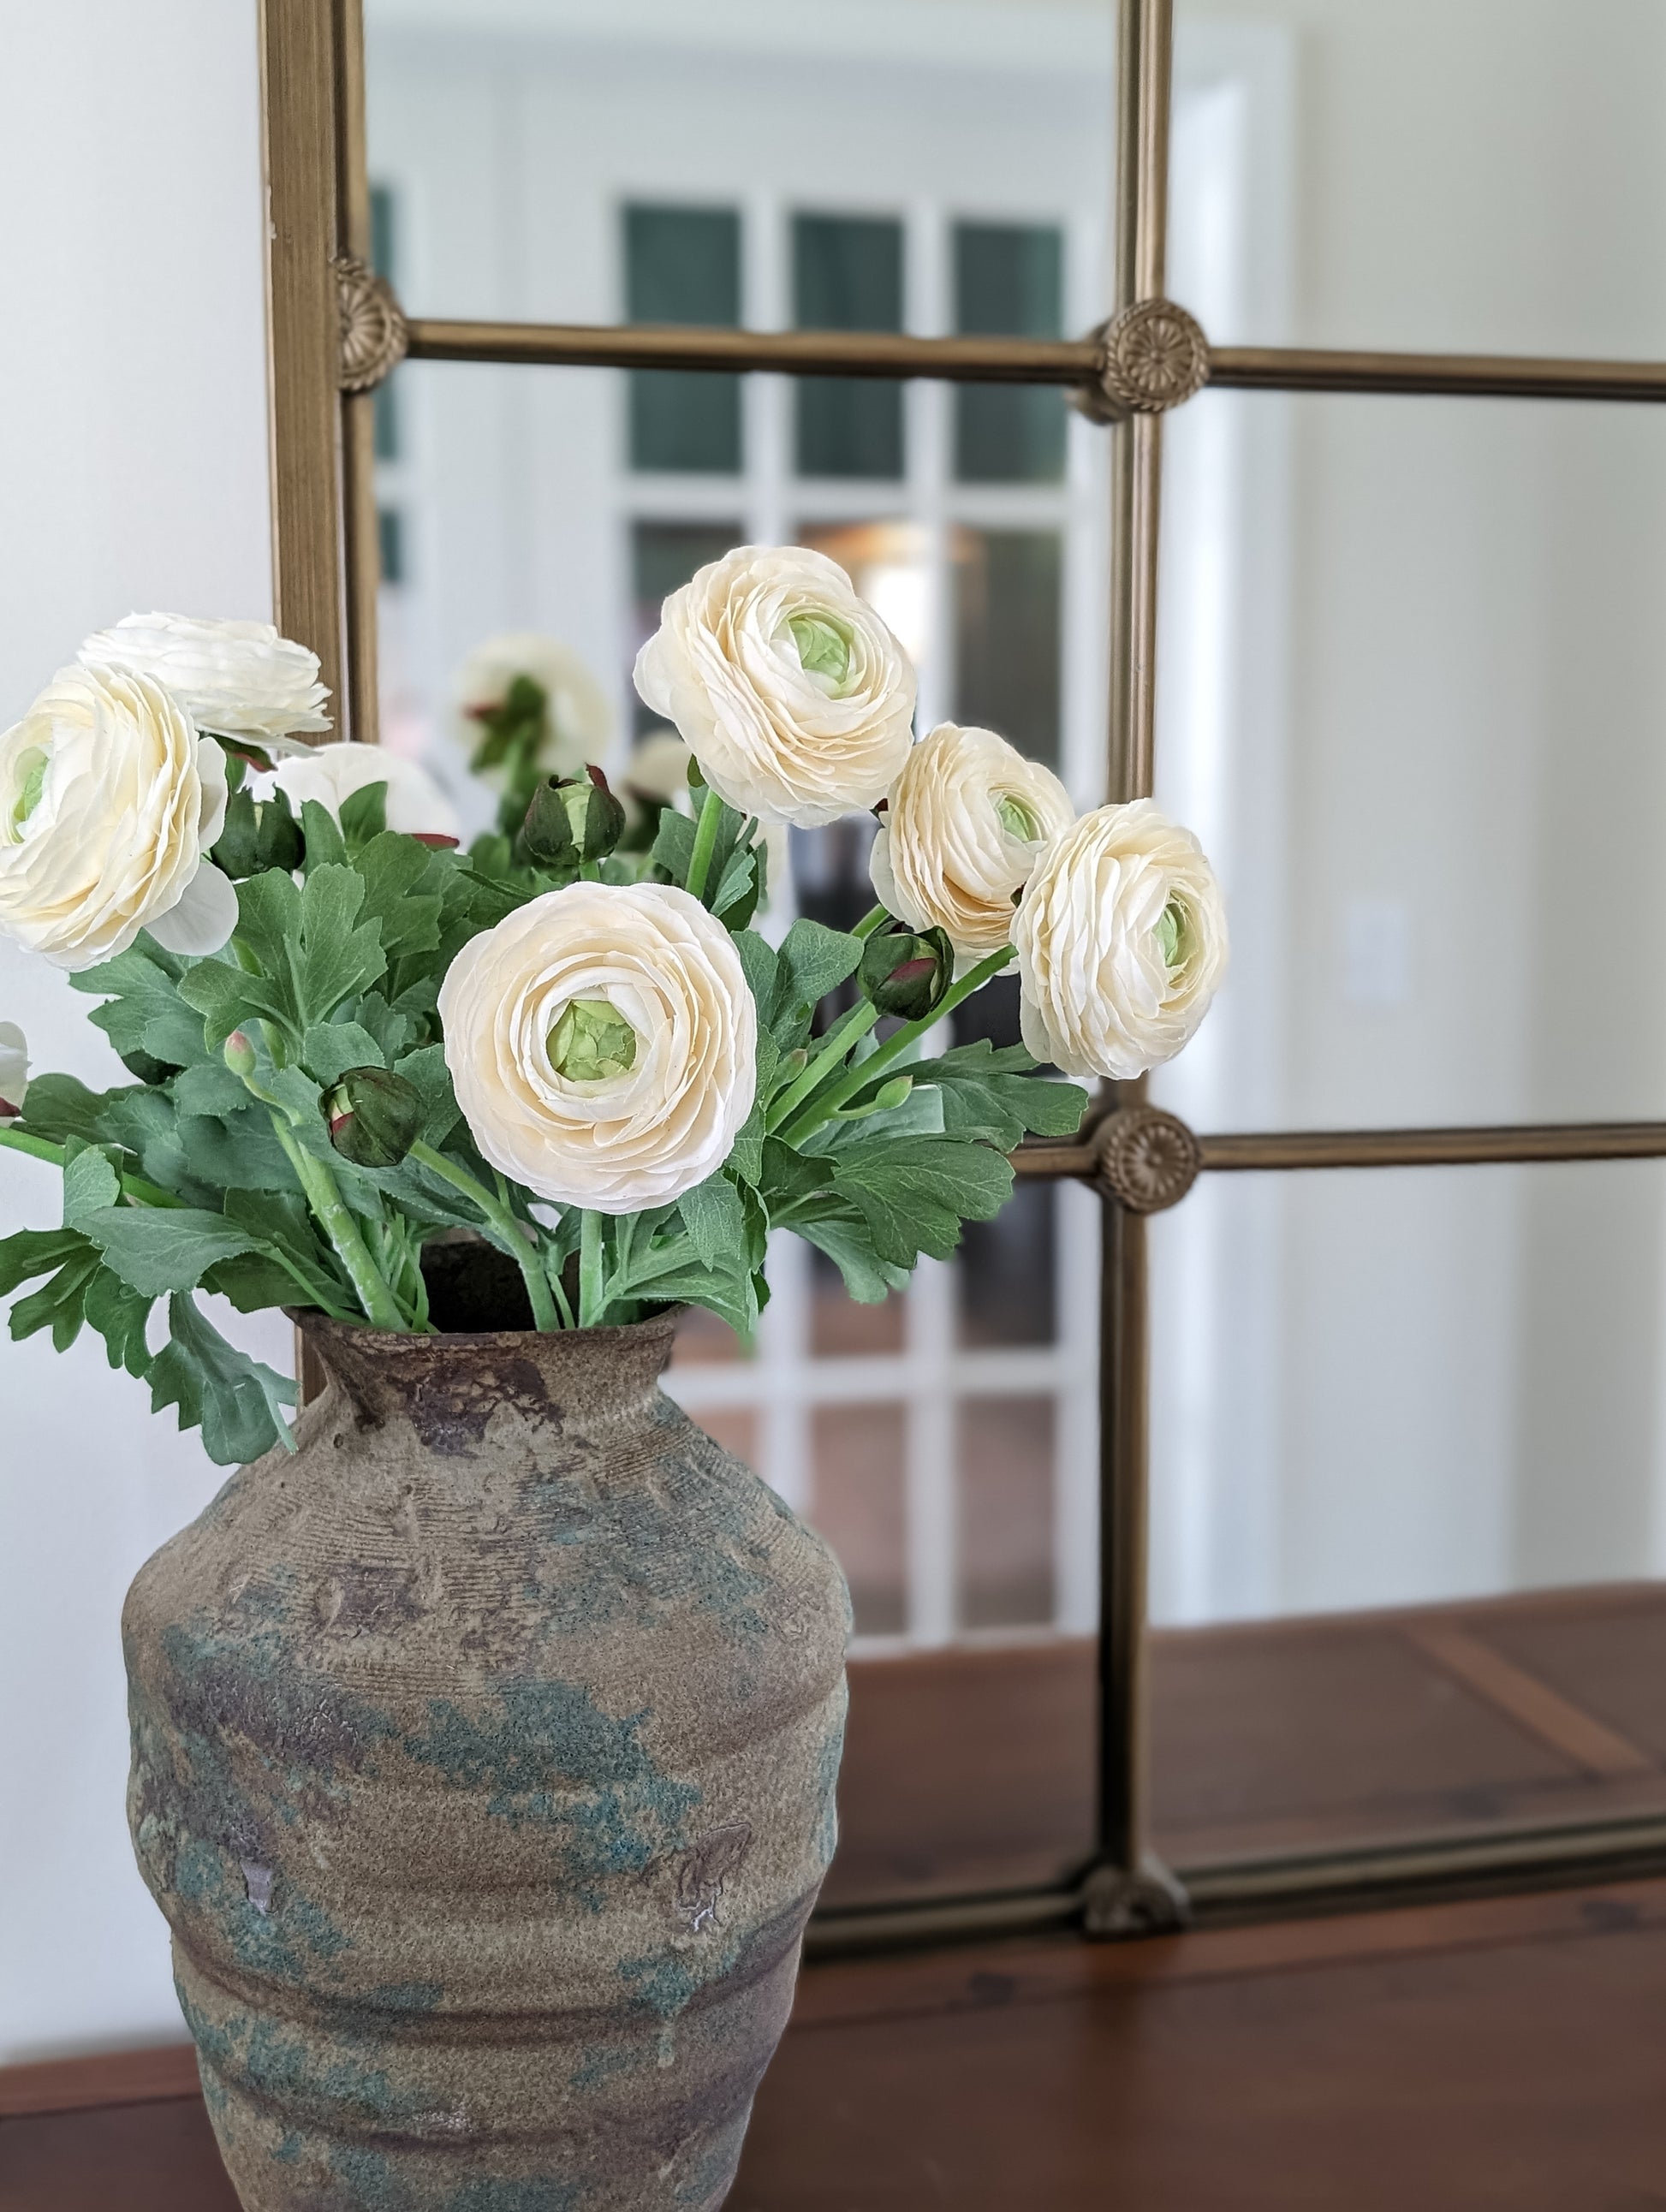 Set of 6 artificial real touch blooming ranunculus flower in ivory, styled in vintage terra cotta vase against mirror.